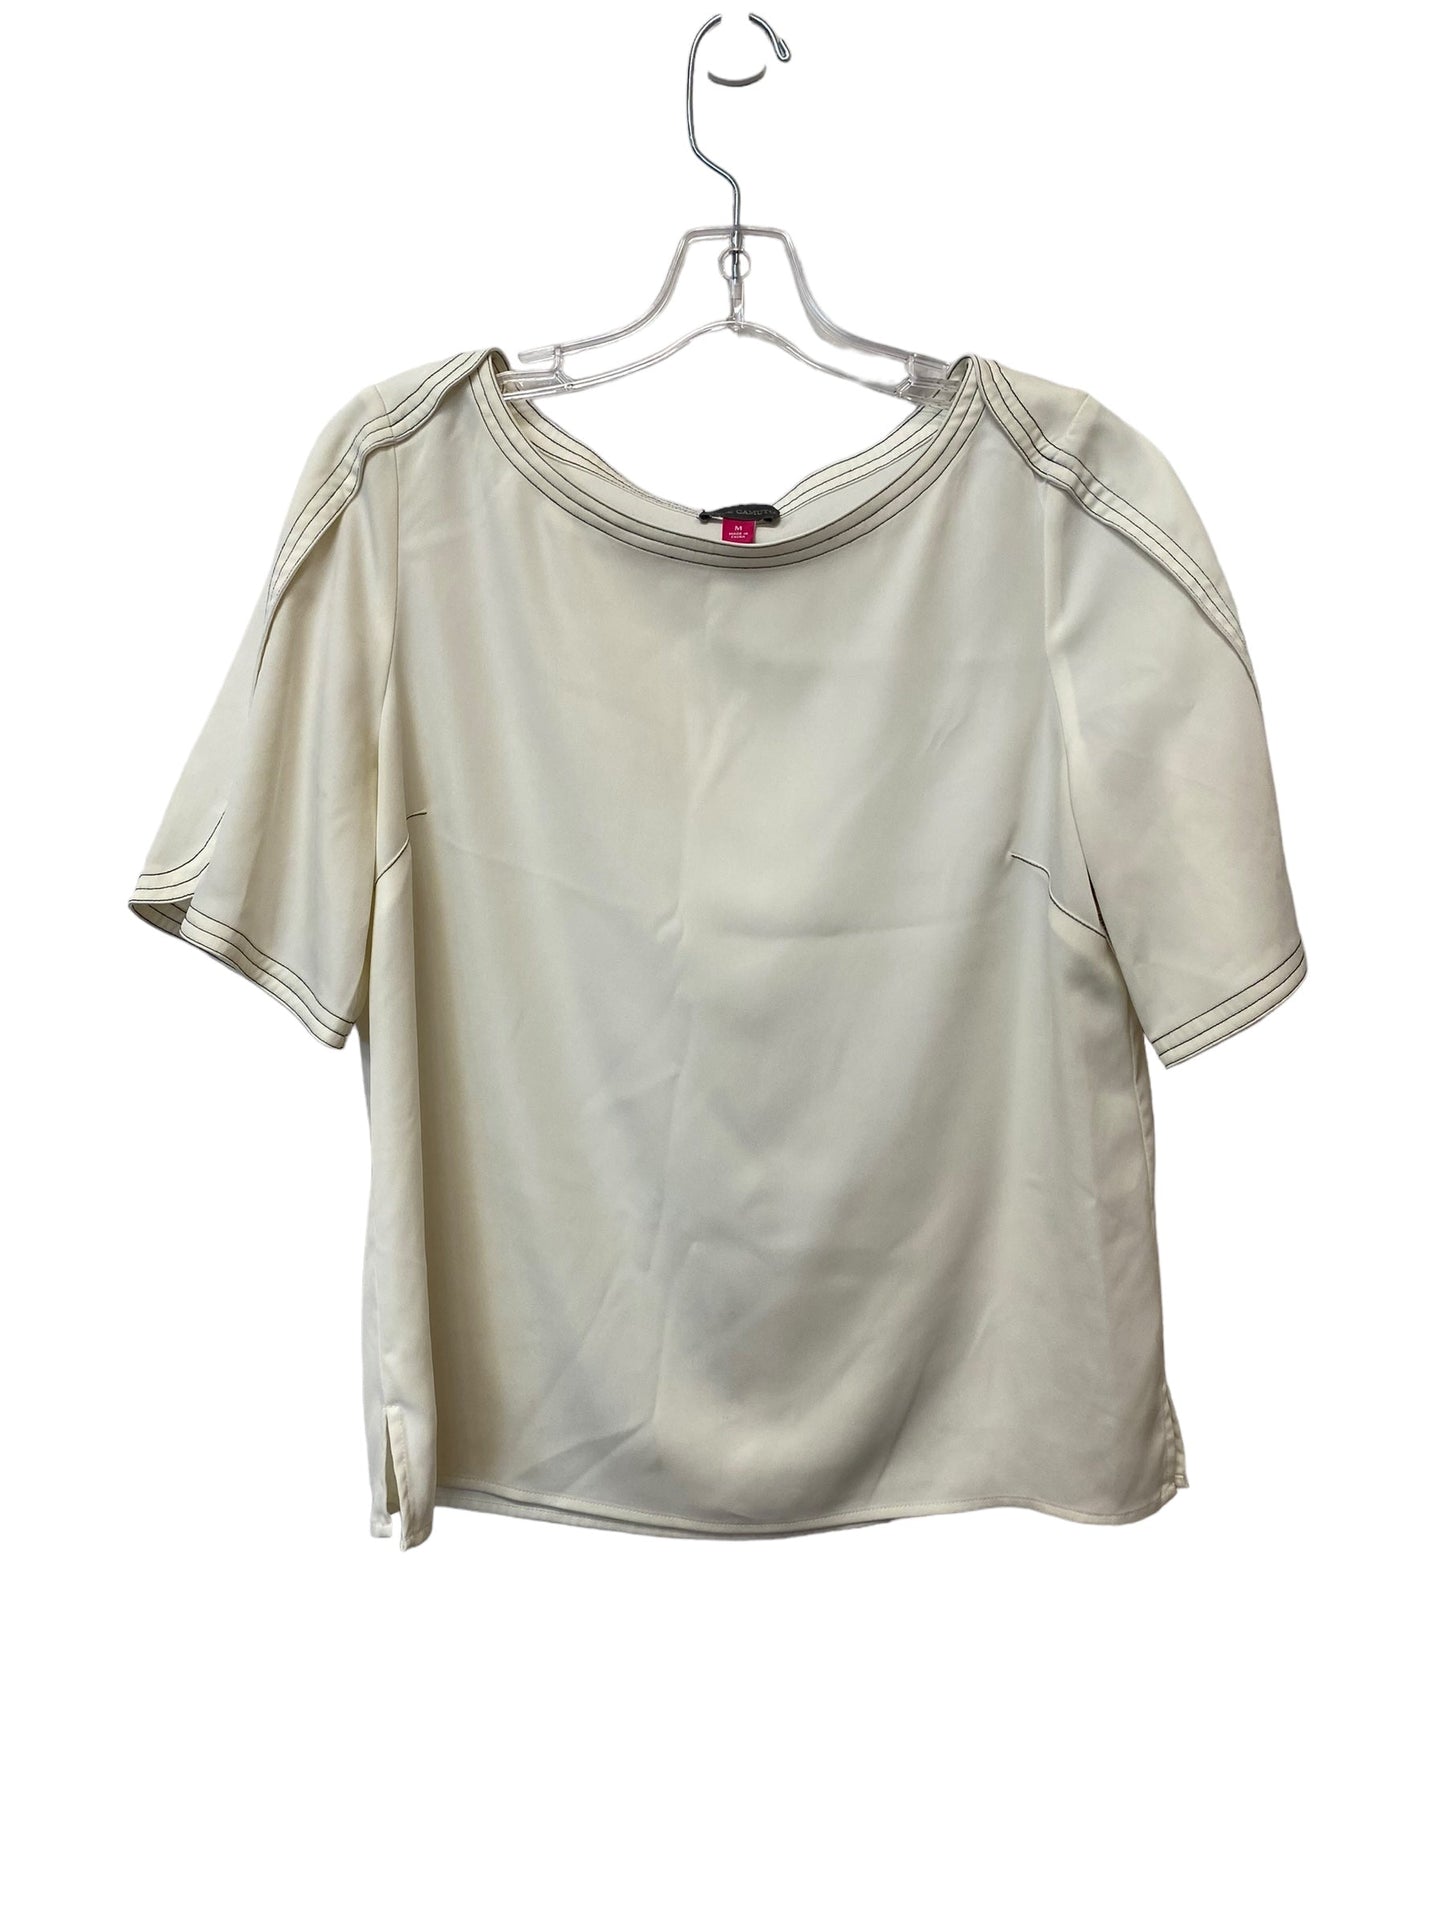 Cream Top Short Sleeve Vince Camuto, Size M